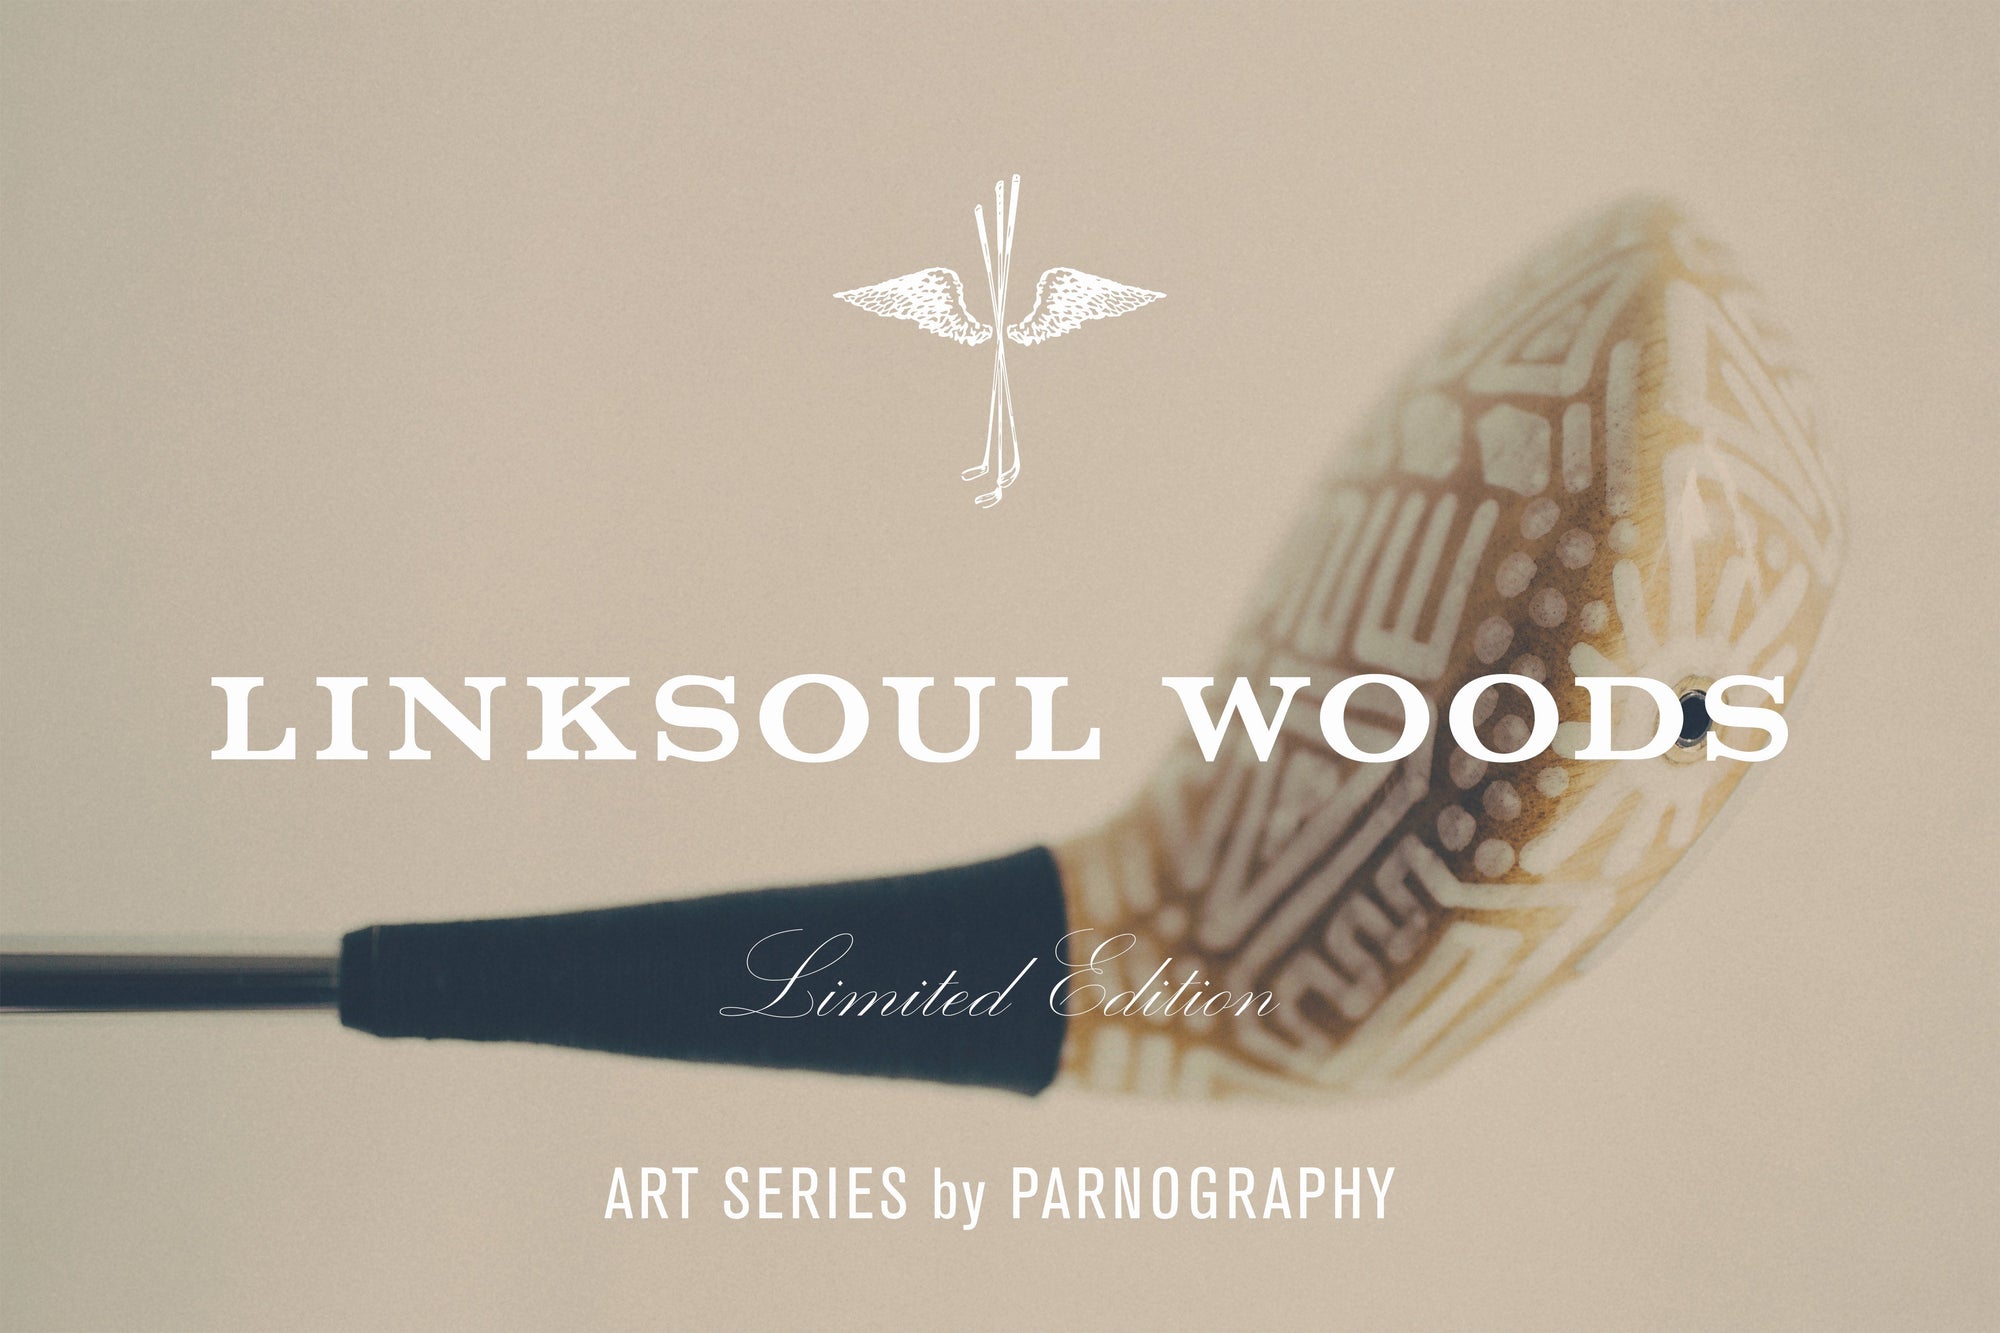 Linksoul Woods / Art Series by Parnography